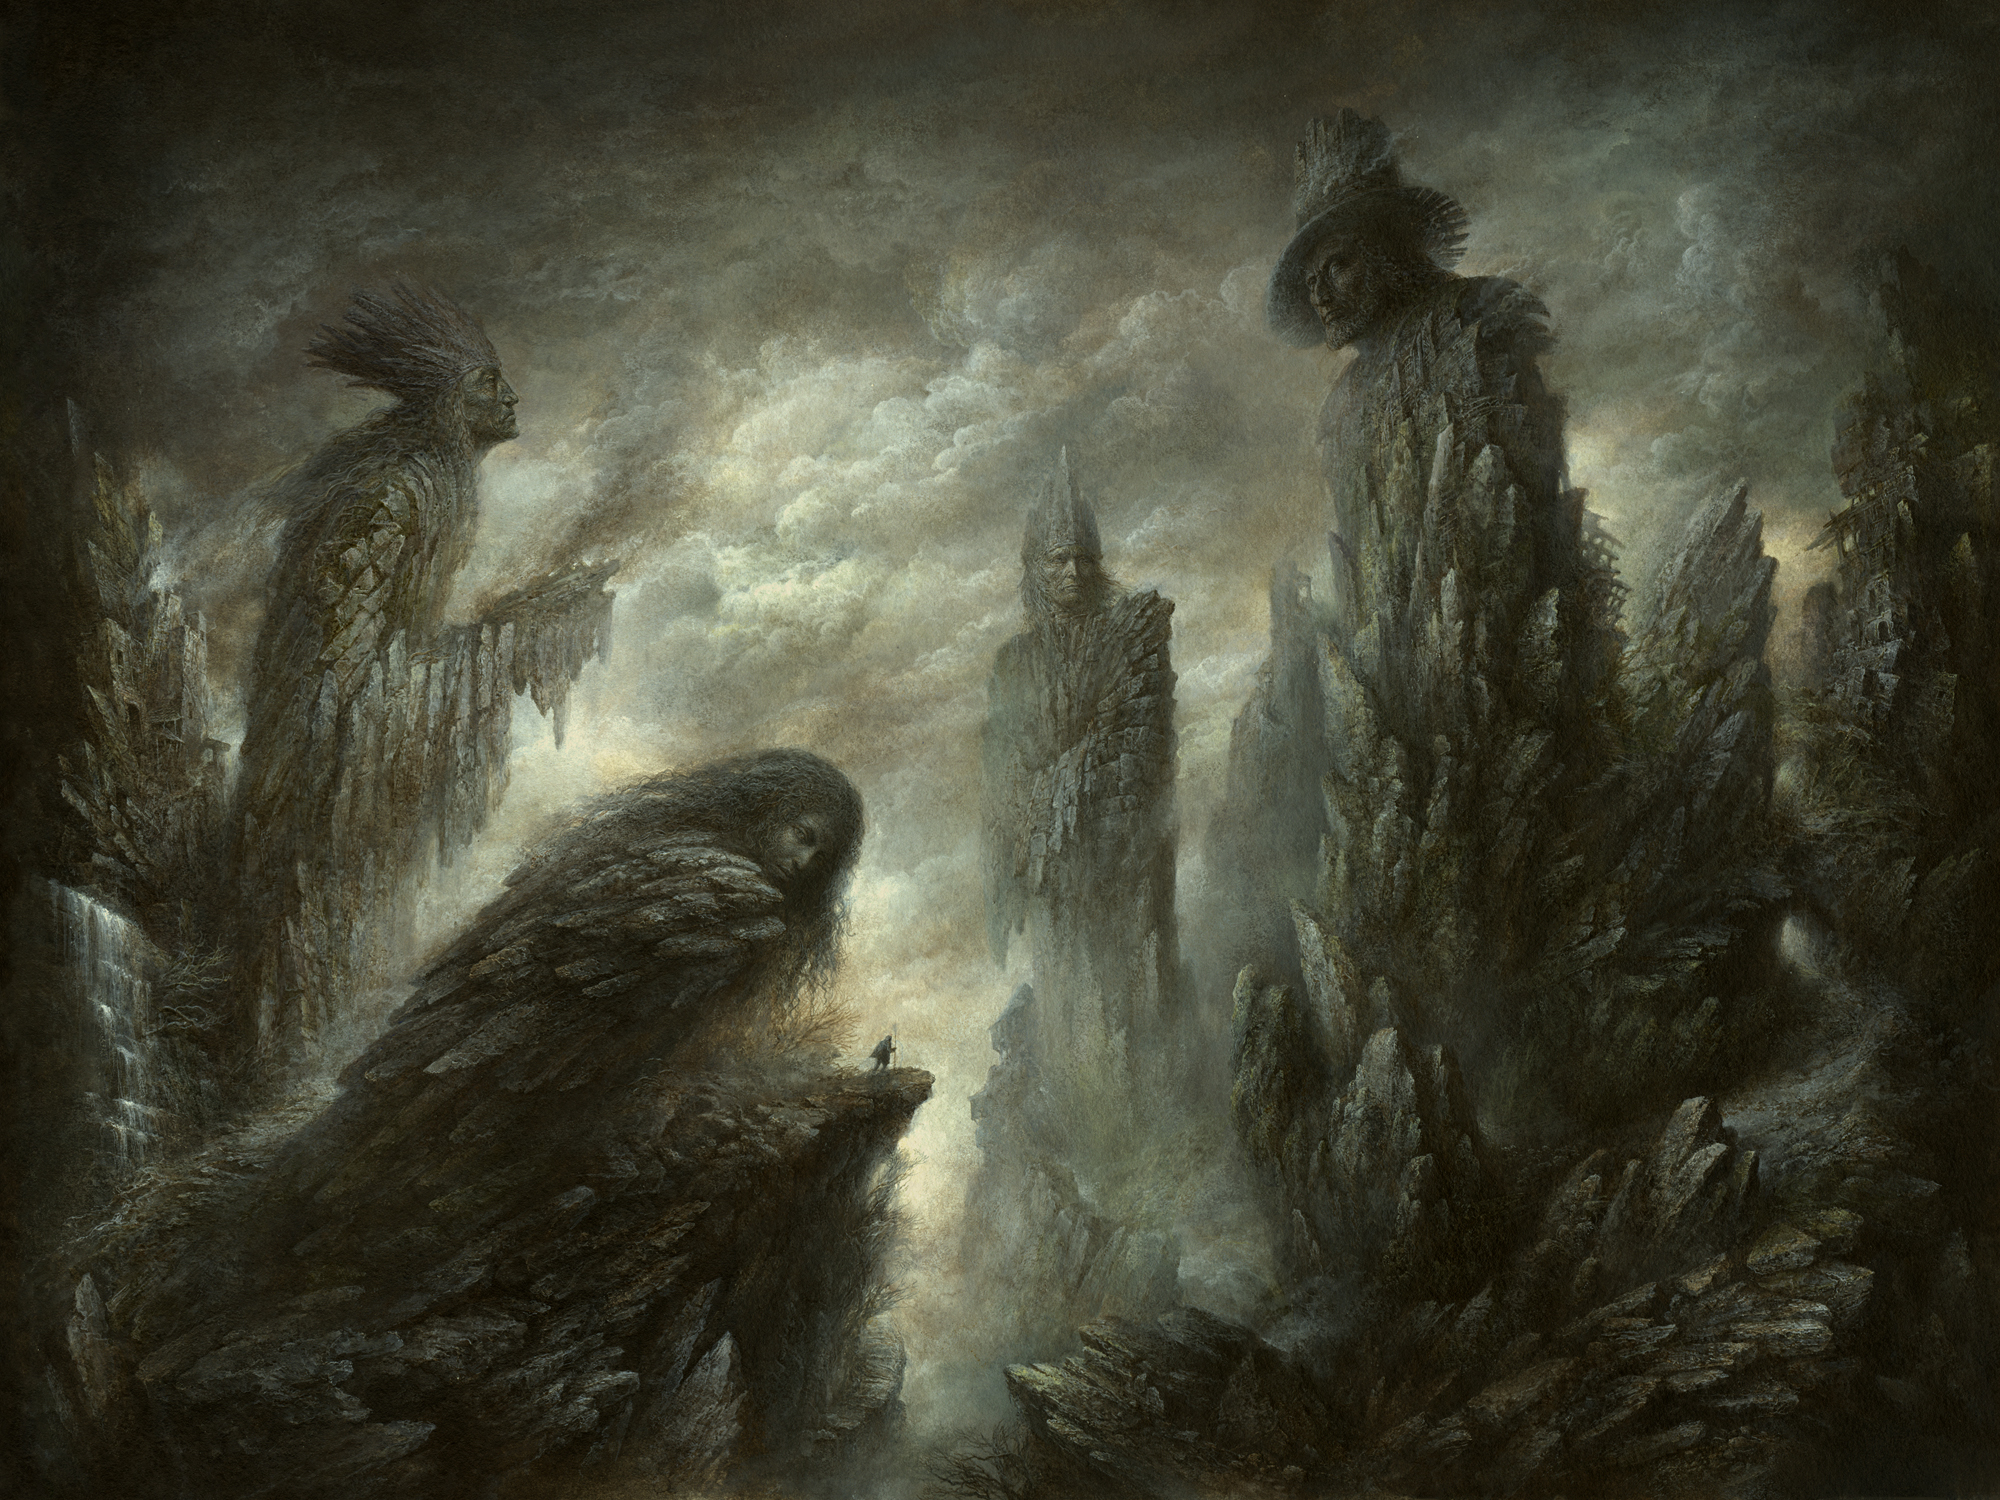 Wallpaper, painting, rock, ruin, artwork, surreal, cliff, gloomy, statue, path, giant, mythology, colossus, ART, majestic, moody, mountain, acrylic, darkness, screenshot, drybrush, ominous, divide 2000x1500